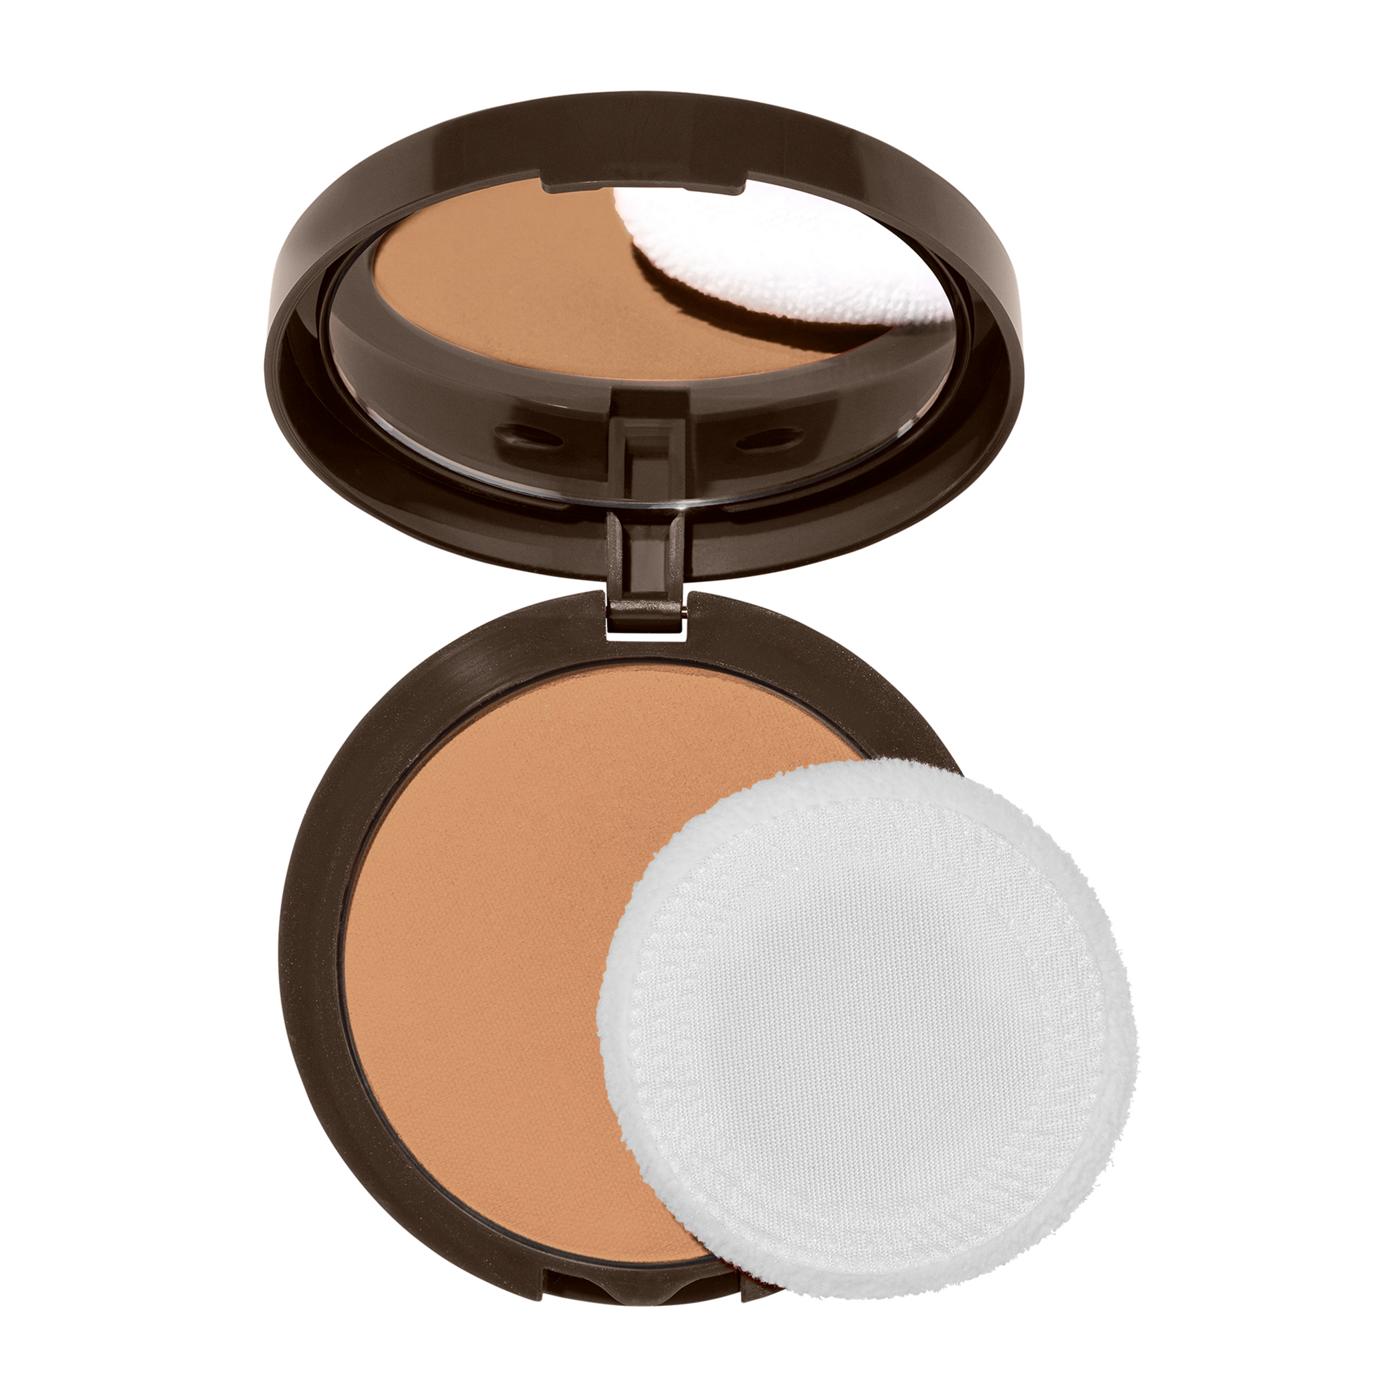 Covergirl Clean Invisible Pressed Powder - Warm Nude; image 9 of 15